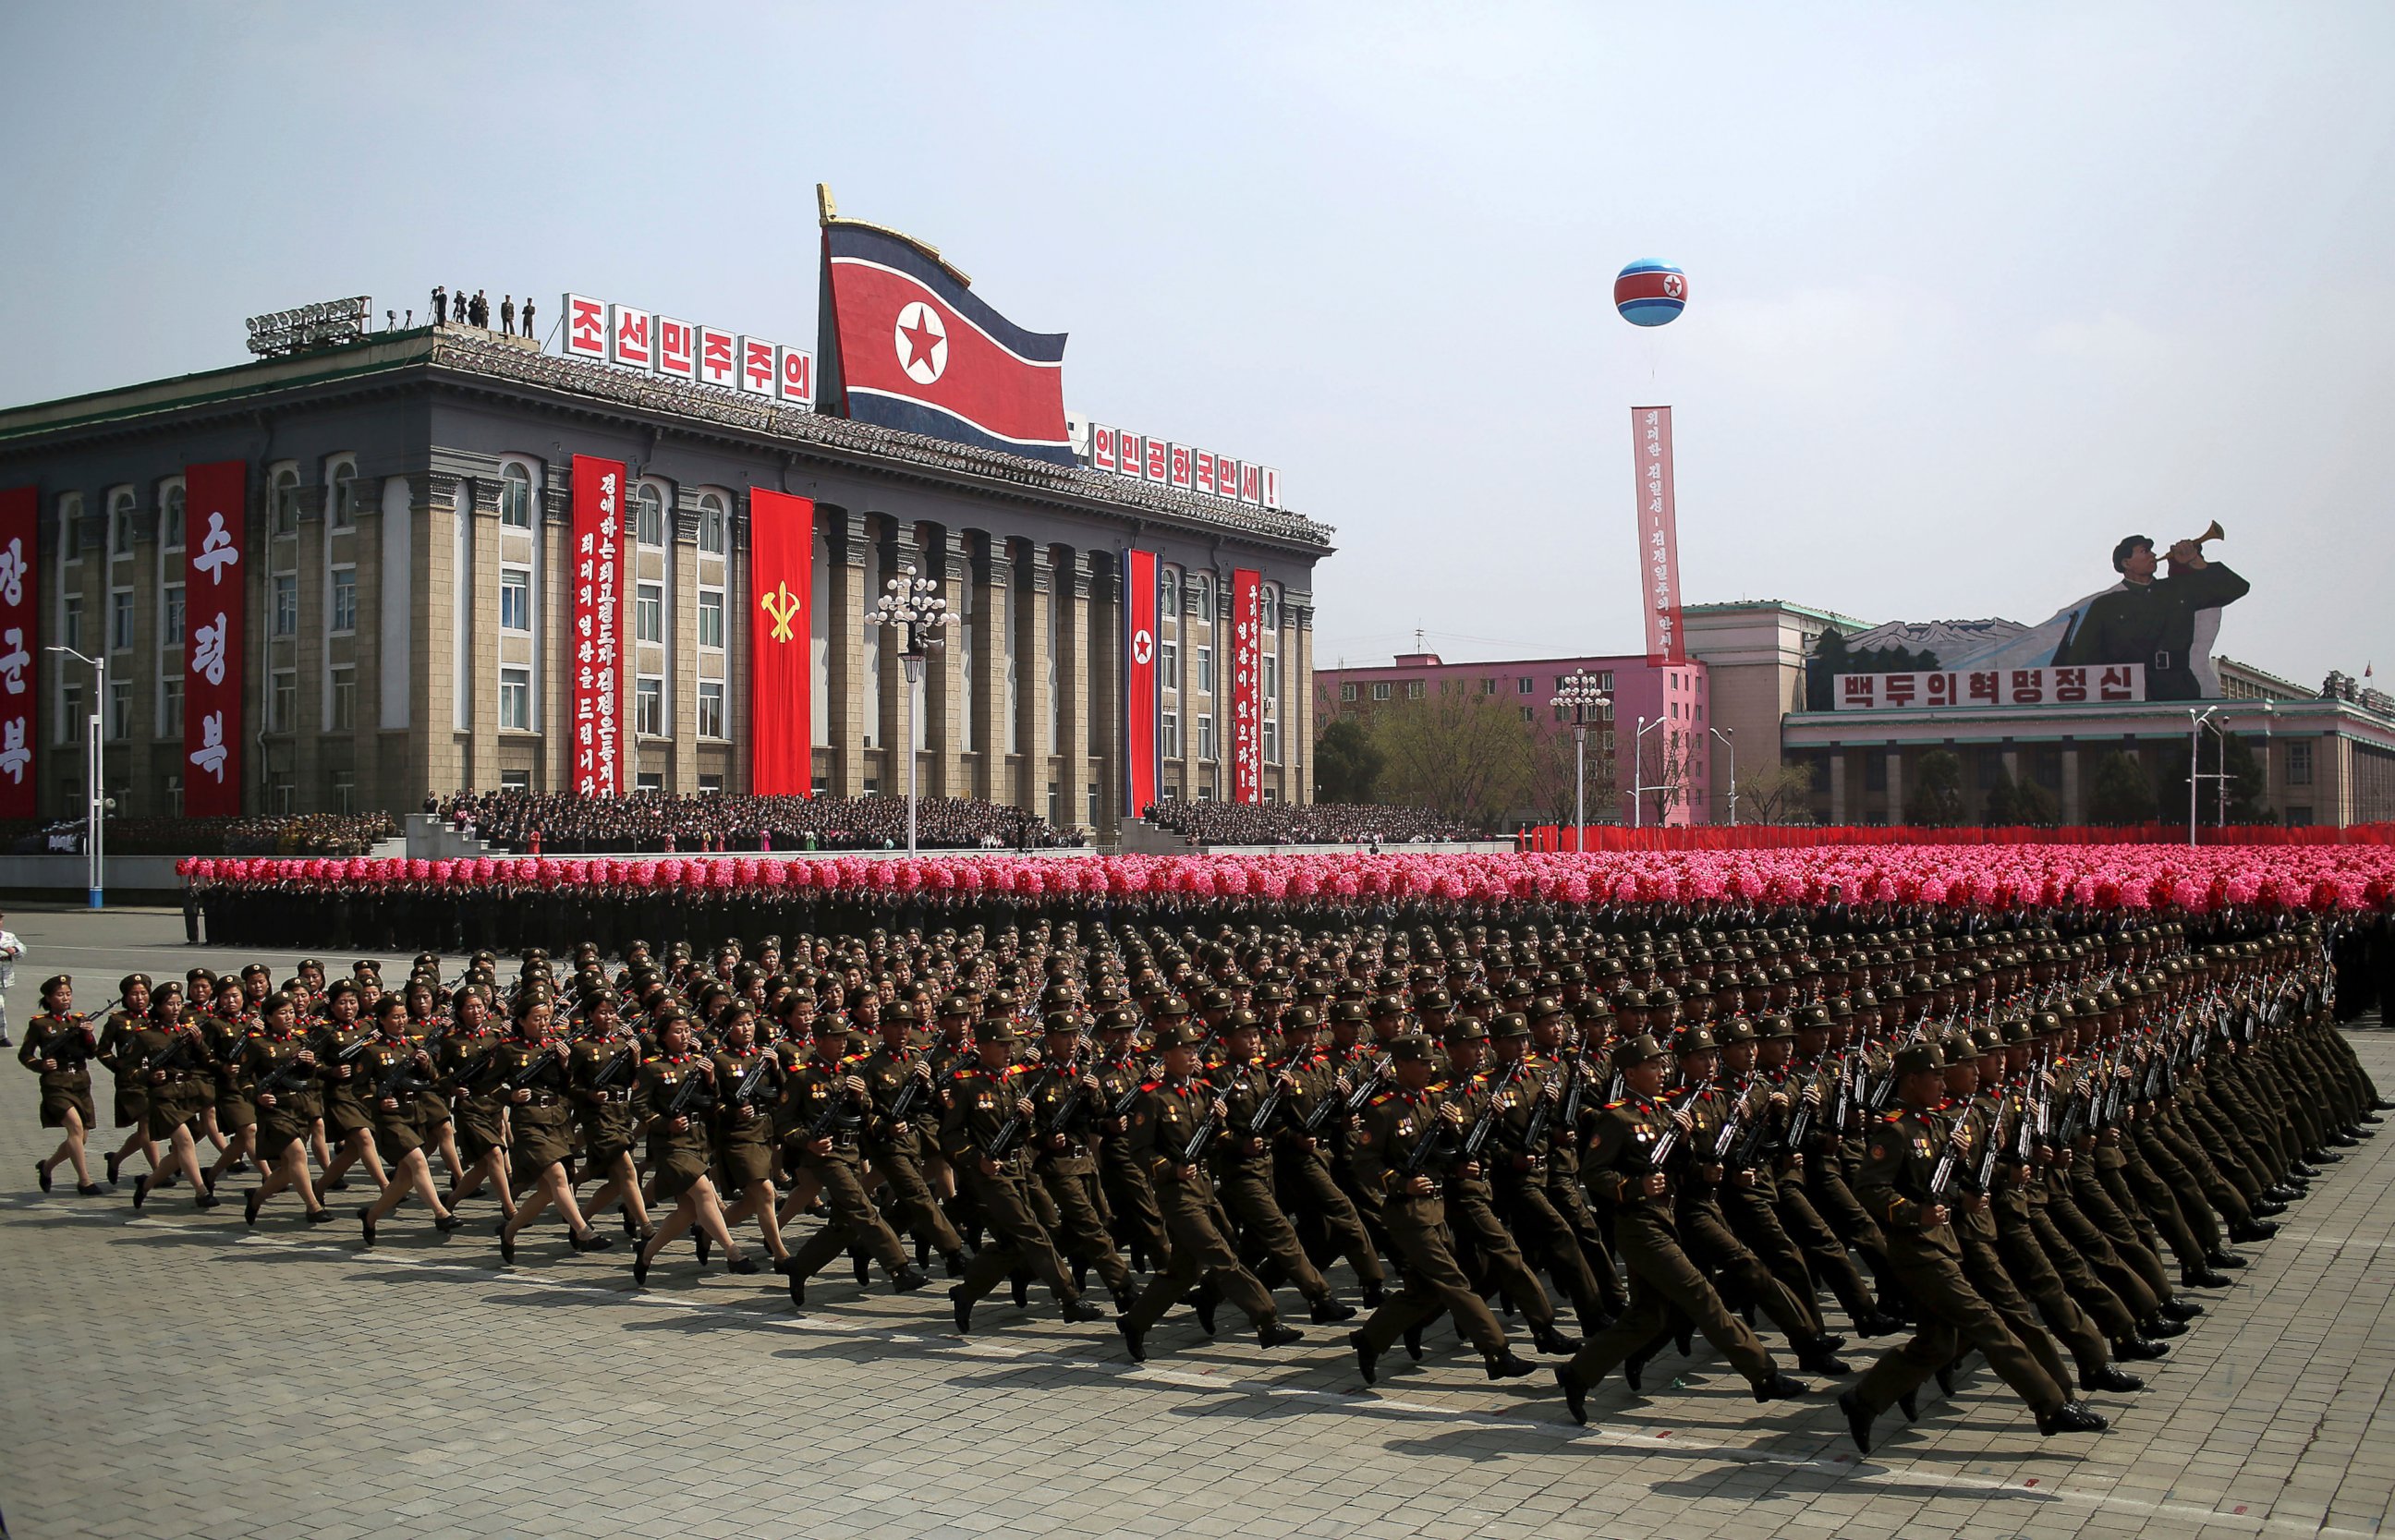 PHOTO: Soldiers march across Kim Il Sung Square during a military parade in Pyongyang, North Korea to celebrate the 105th birth anniversary of Kim Il Sung, April 15, 2017. 